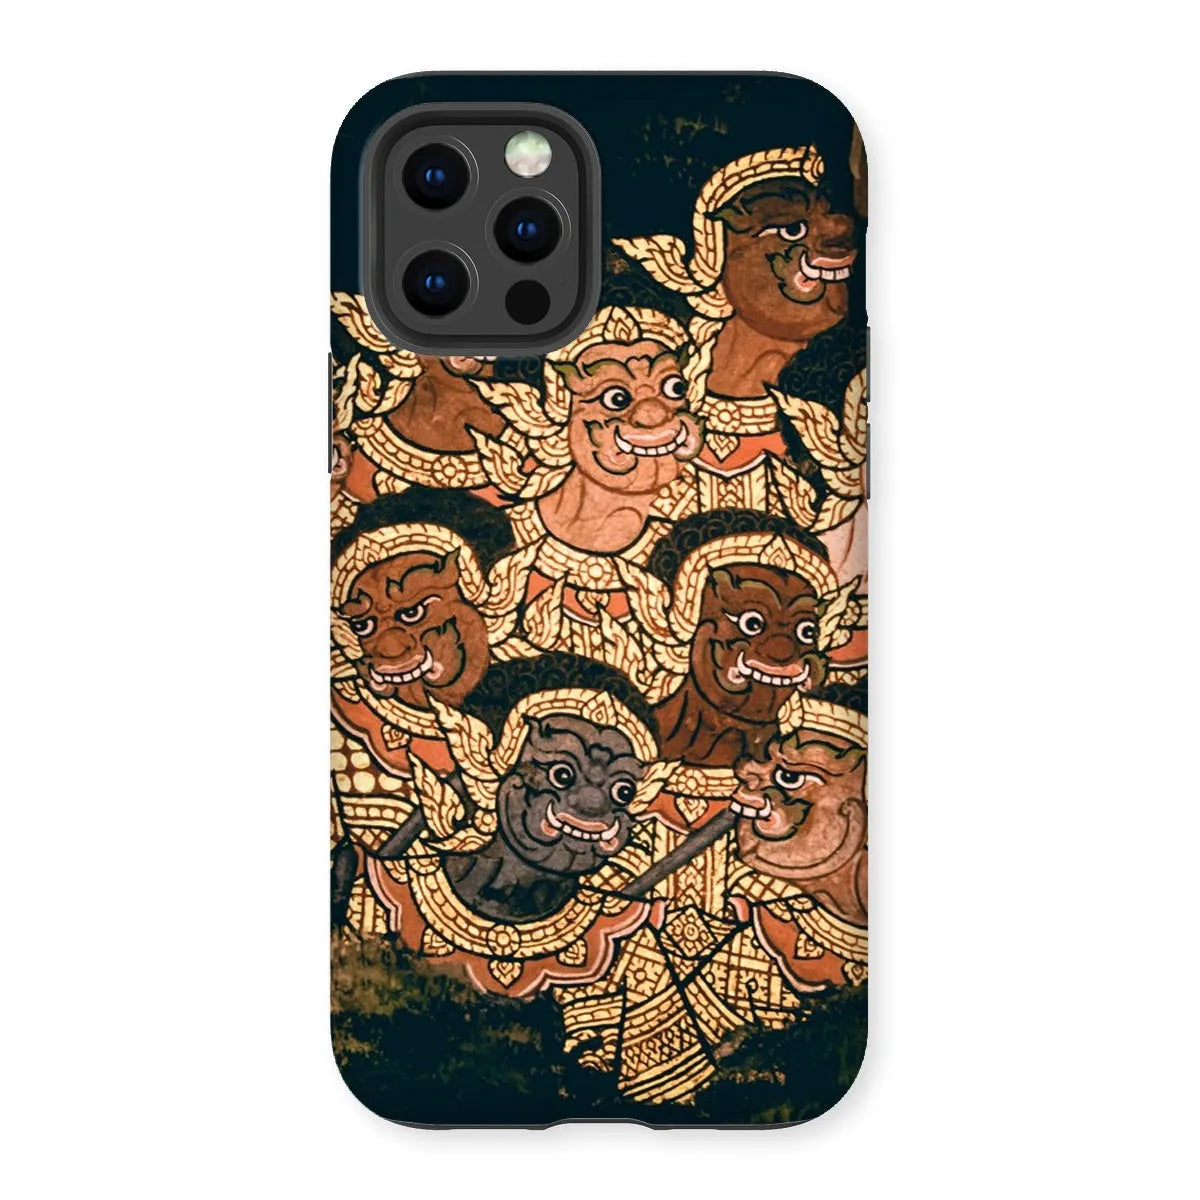 Babes In The Woods - Traditional Thai Myth Phone Case - Iphone 12 Pro / Matte - Mobile Phone Cases - Aesthetic Art